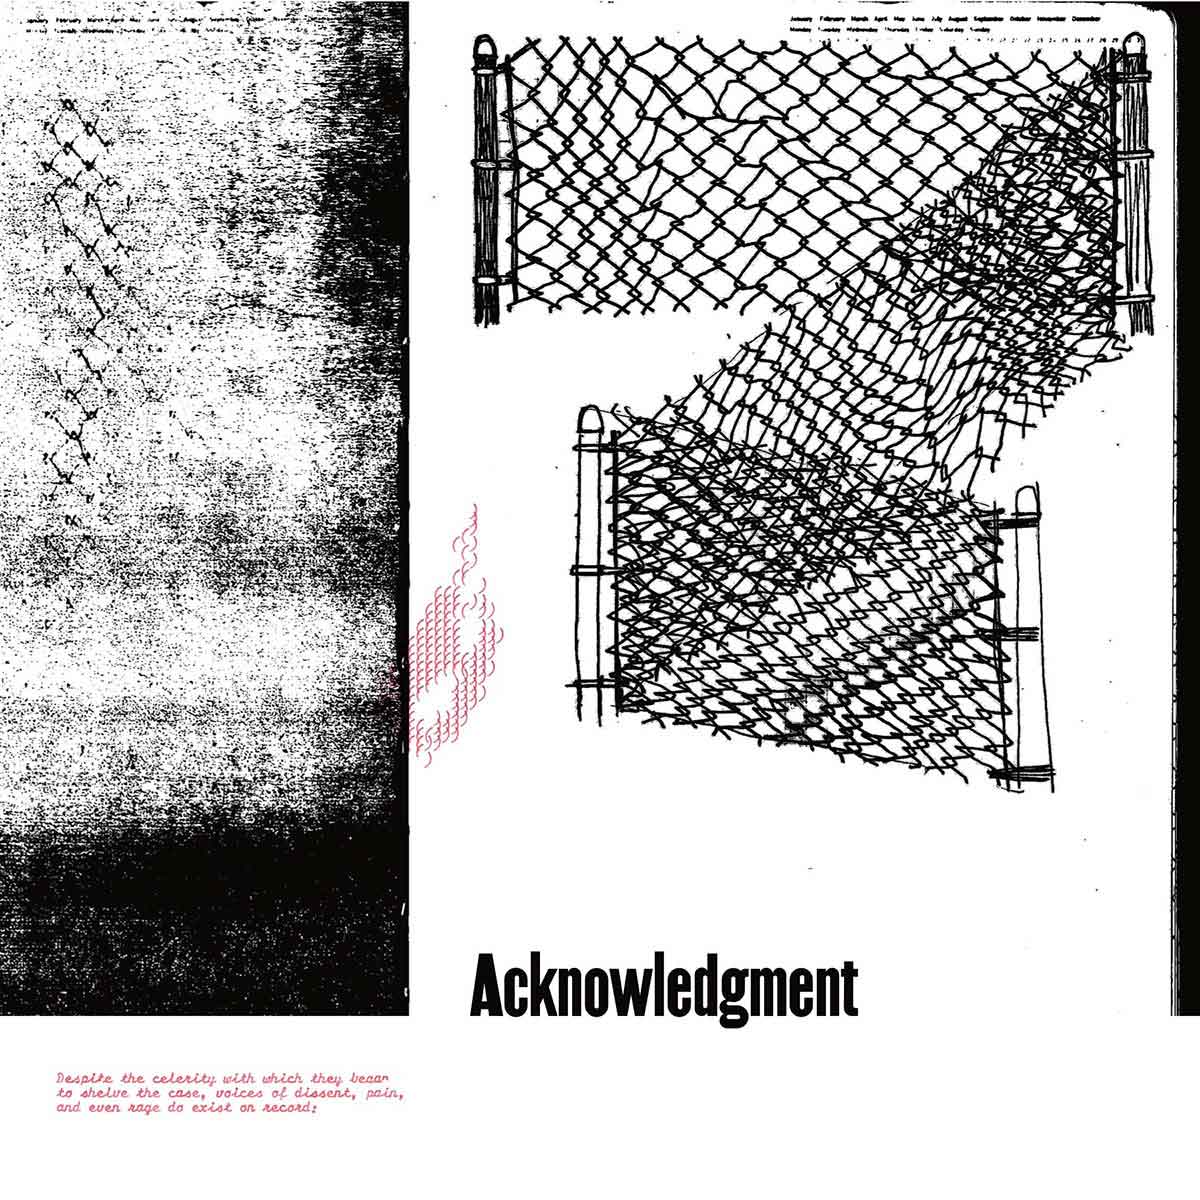 Early art study for Mark Trecka's album Acknowledgment, including illustration and photocopy texture